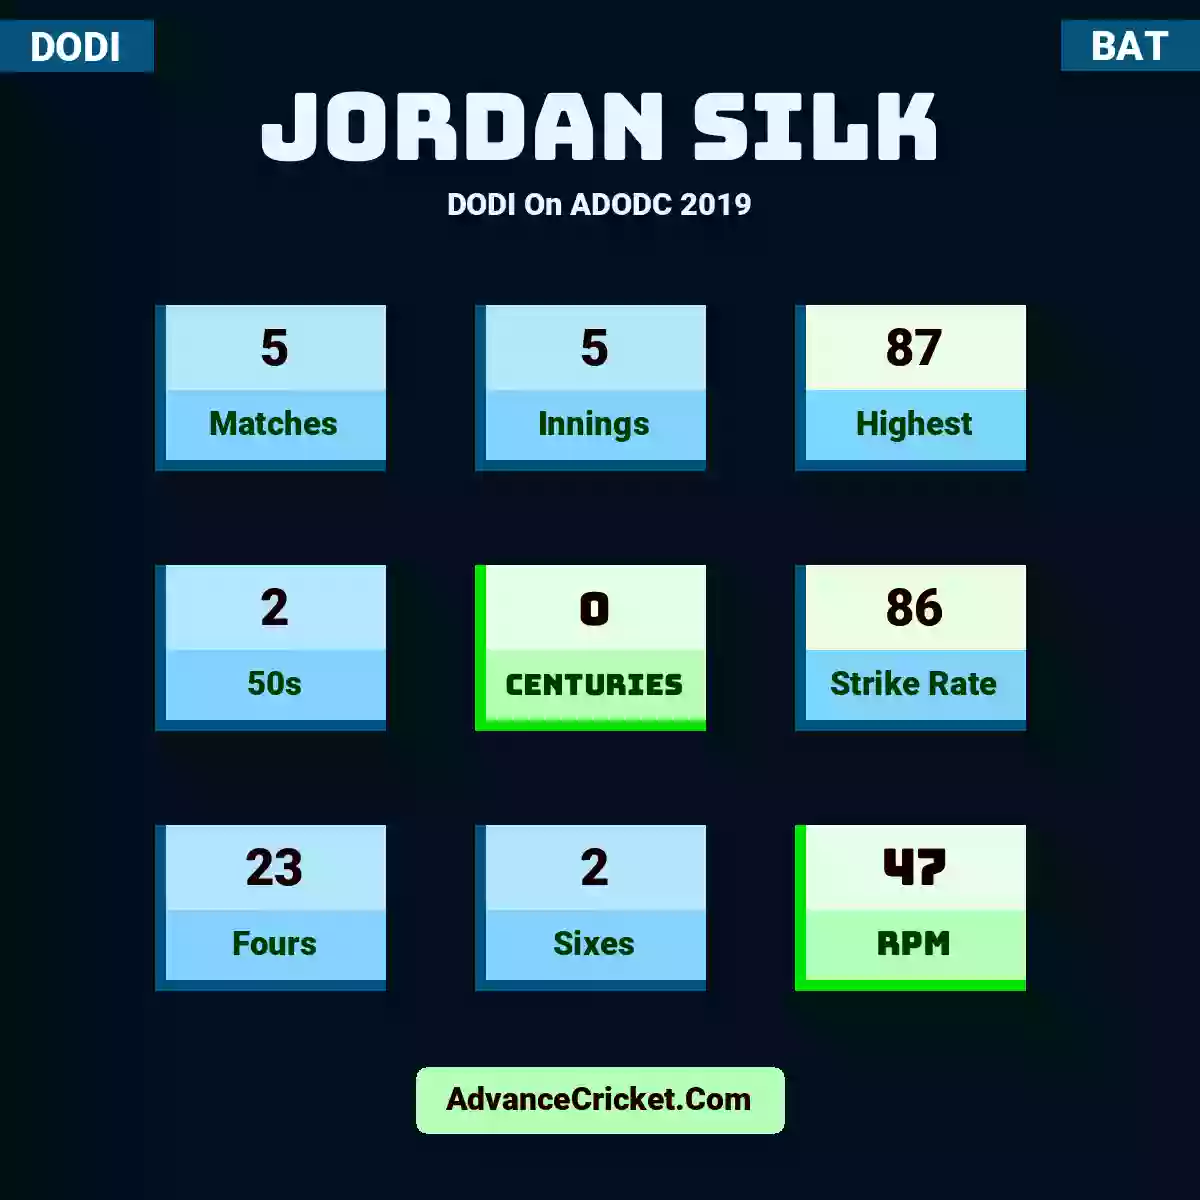 Jordan Silk DODI  On ADODC 2019, Jordan Silk played 5 matches, scored 87 runs as highest, 2 half-centuries, and 0 centuries, with a strike rate of 86. J.Silk hit 23 fours and 2 sixes, with an RPM of 47.